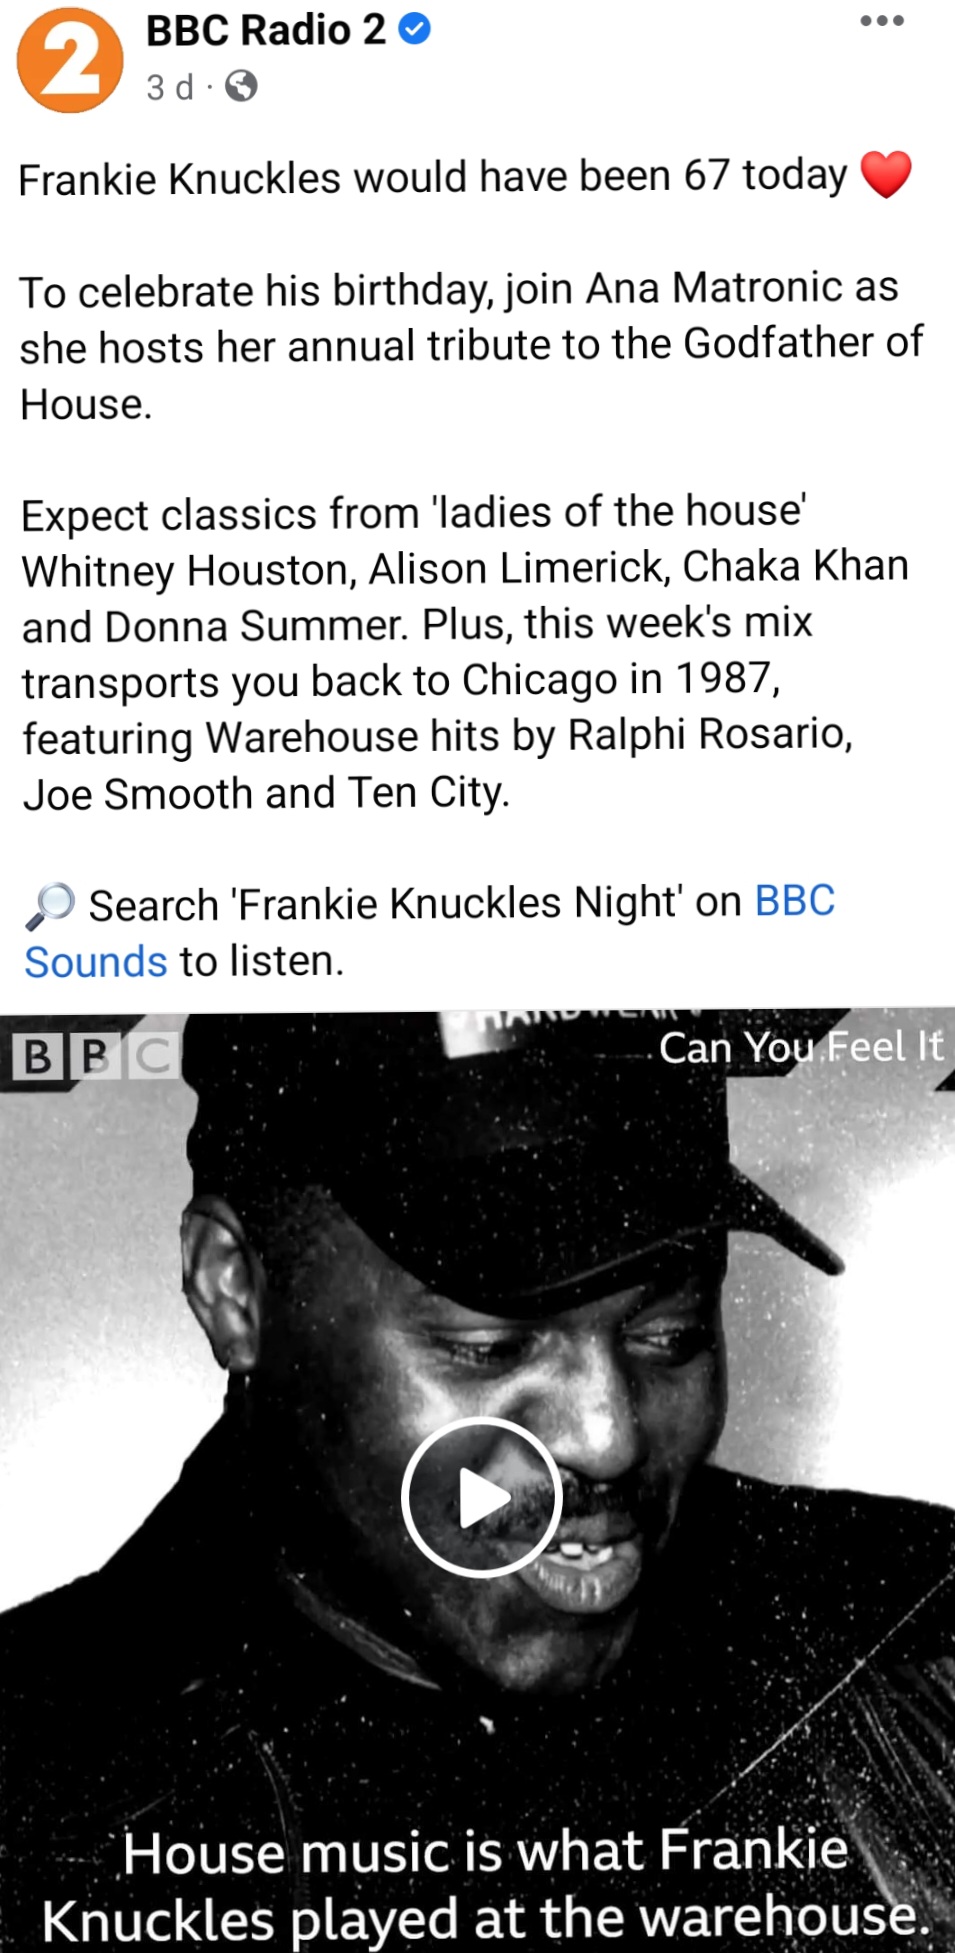 Way to make a guy feel old just as the weekend’s getting started! Frankie Knuckles would have been 67 years old this week – and which BBC radio station mentioned this? Radio 2…